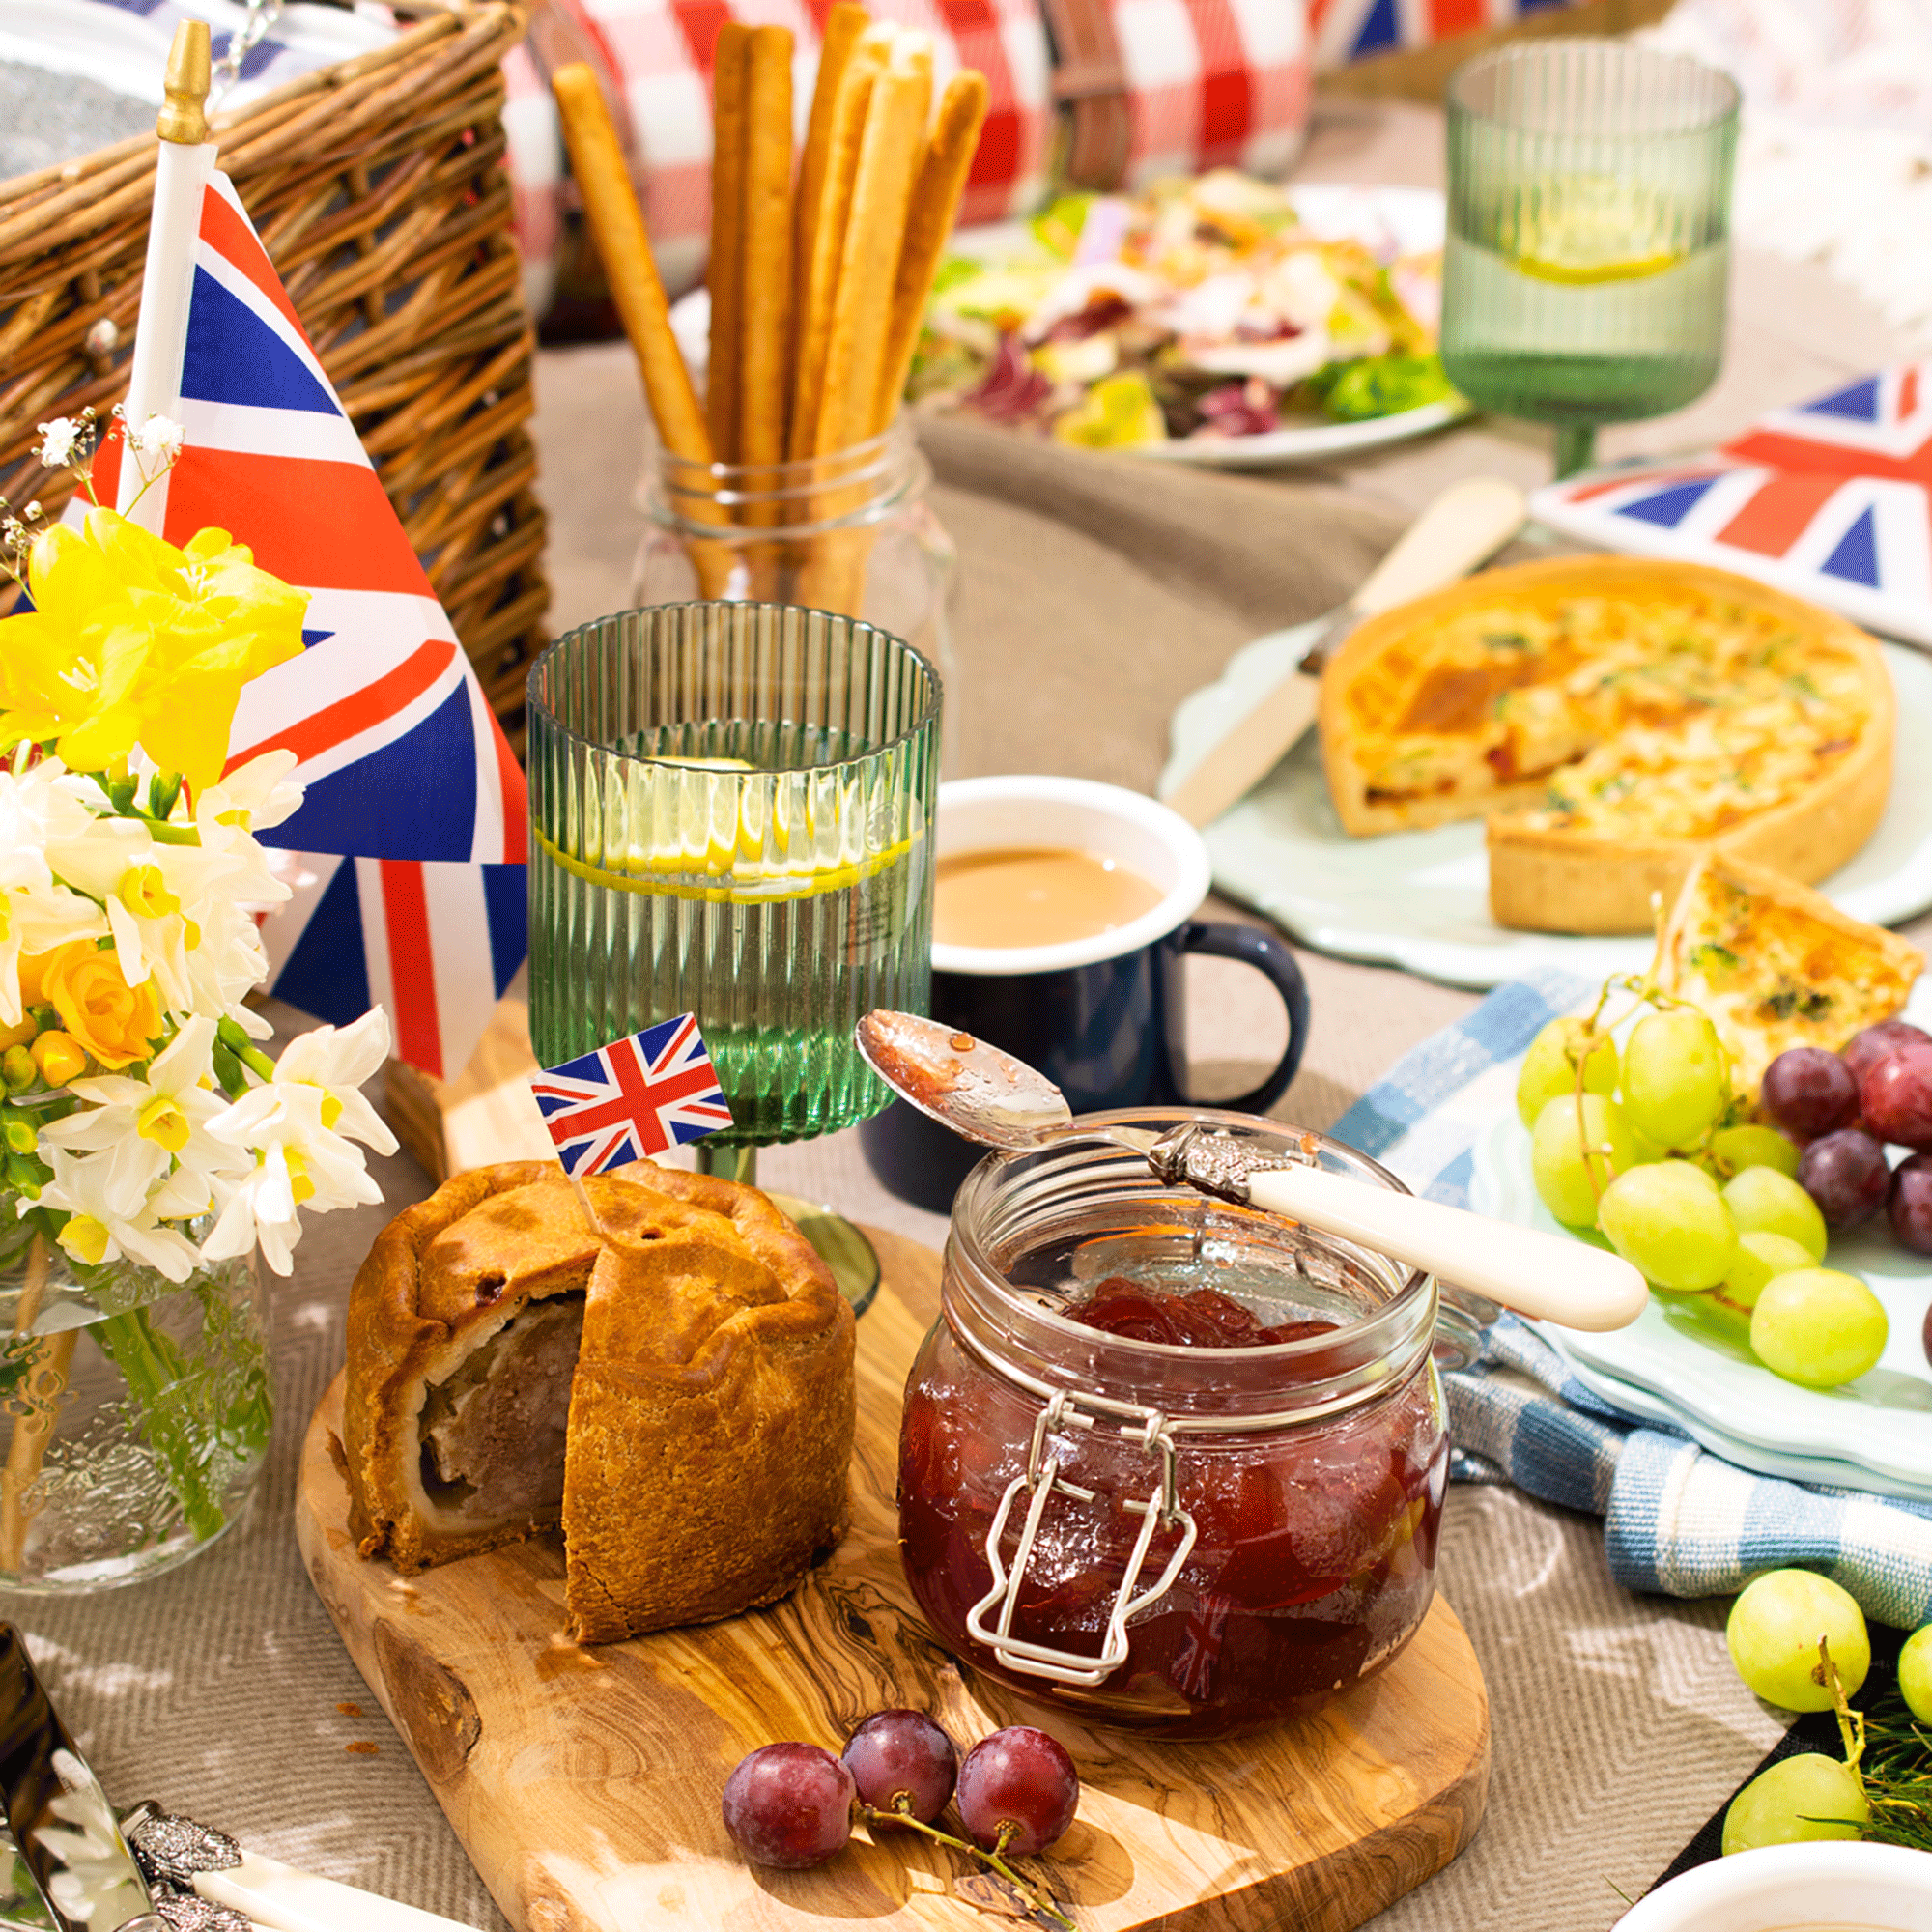 coronation picnic with union jack flags in baskets